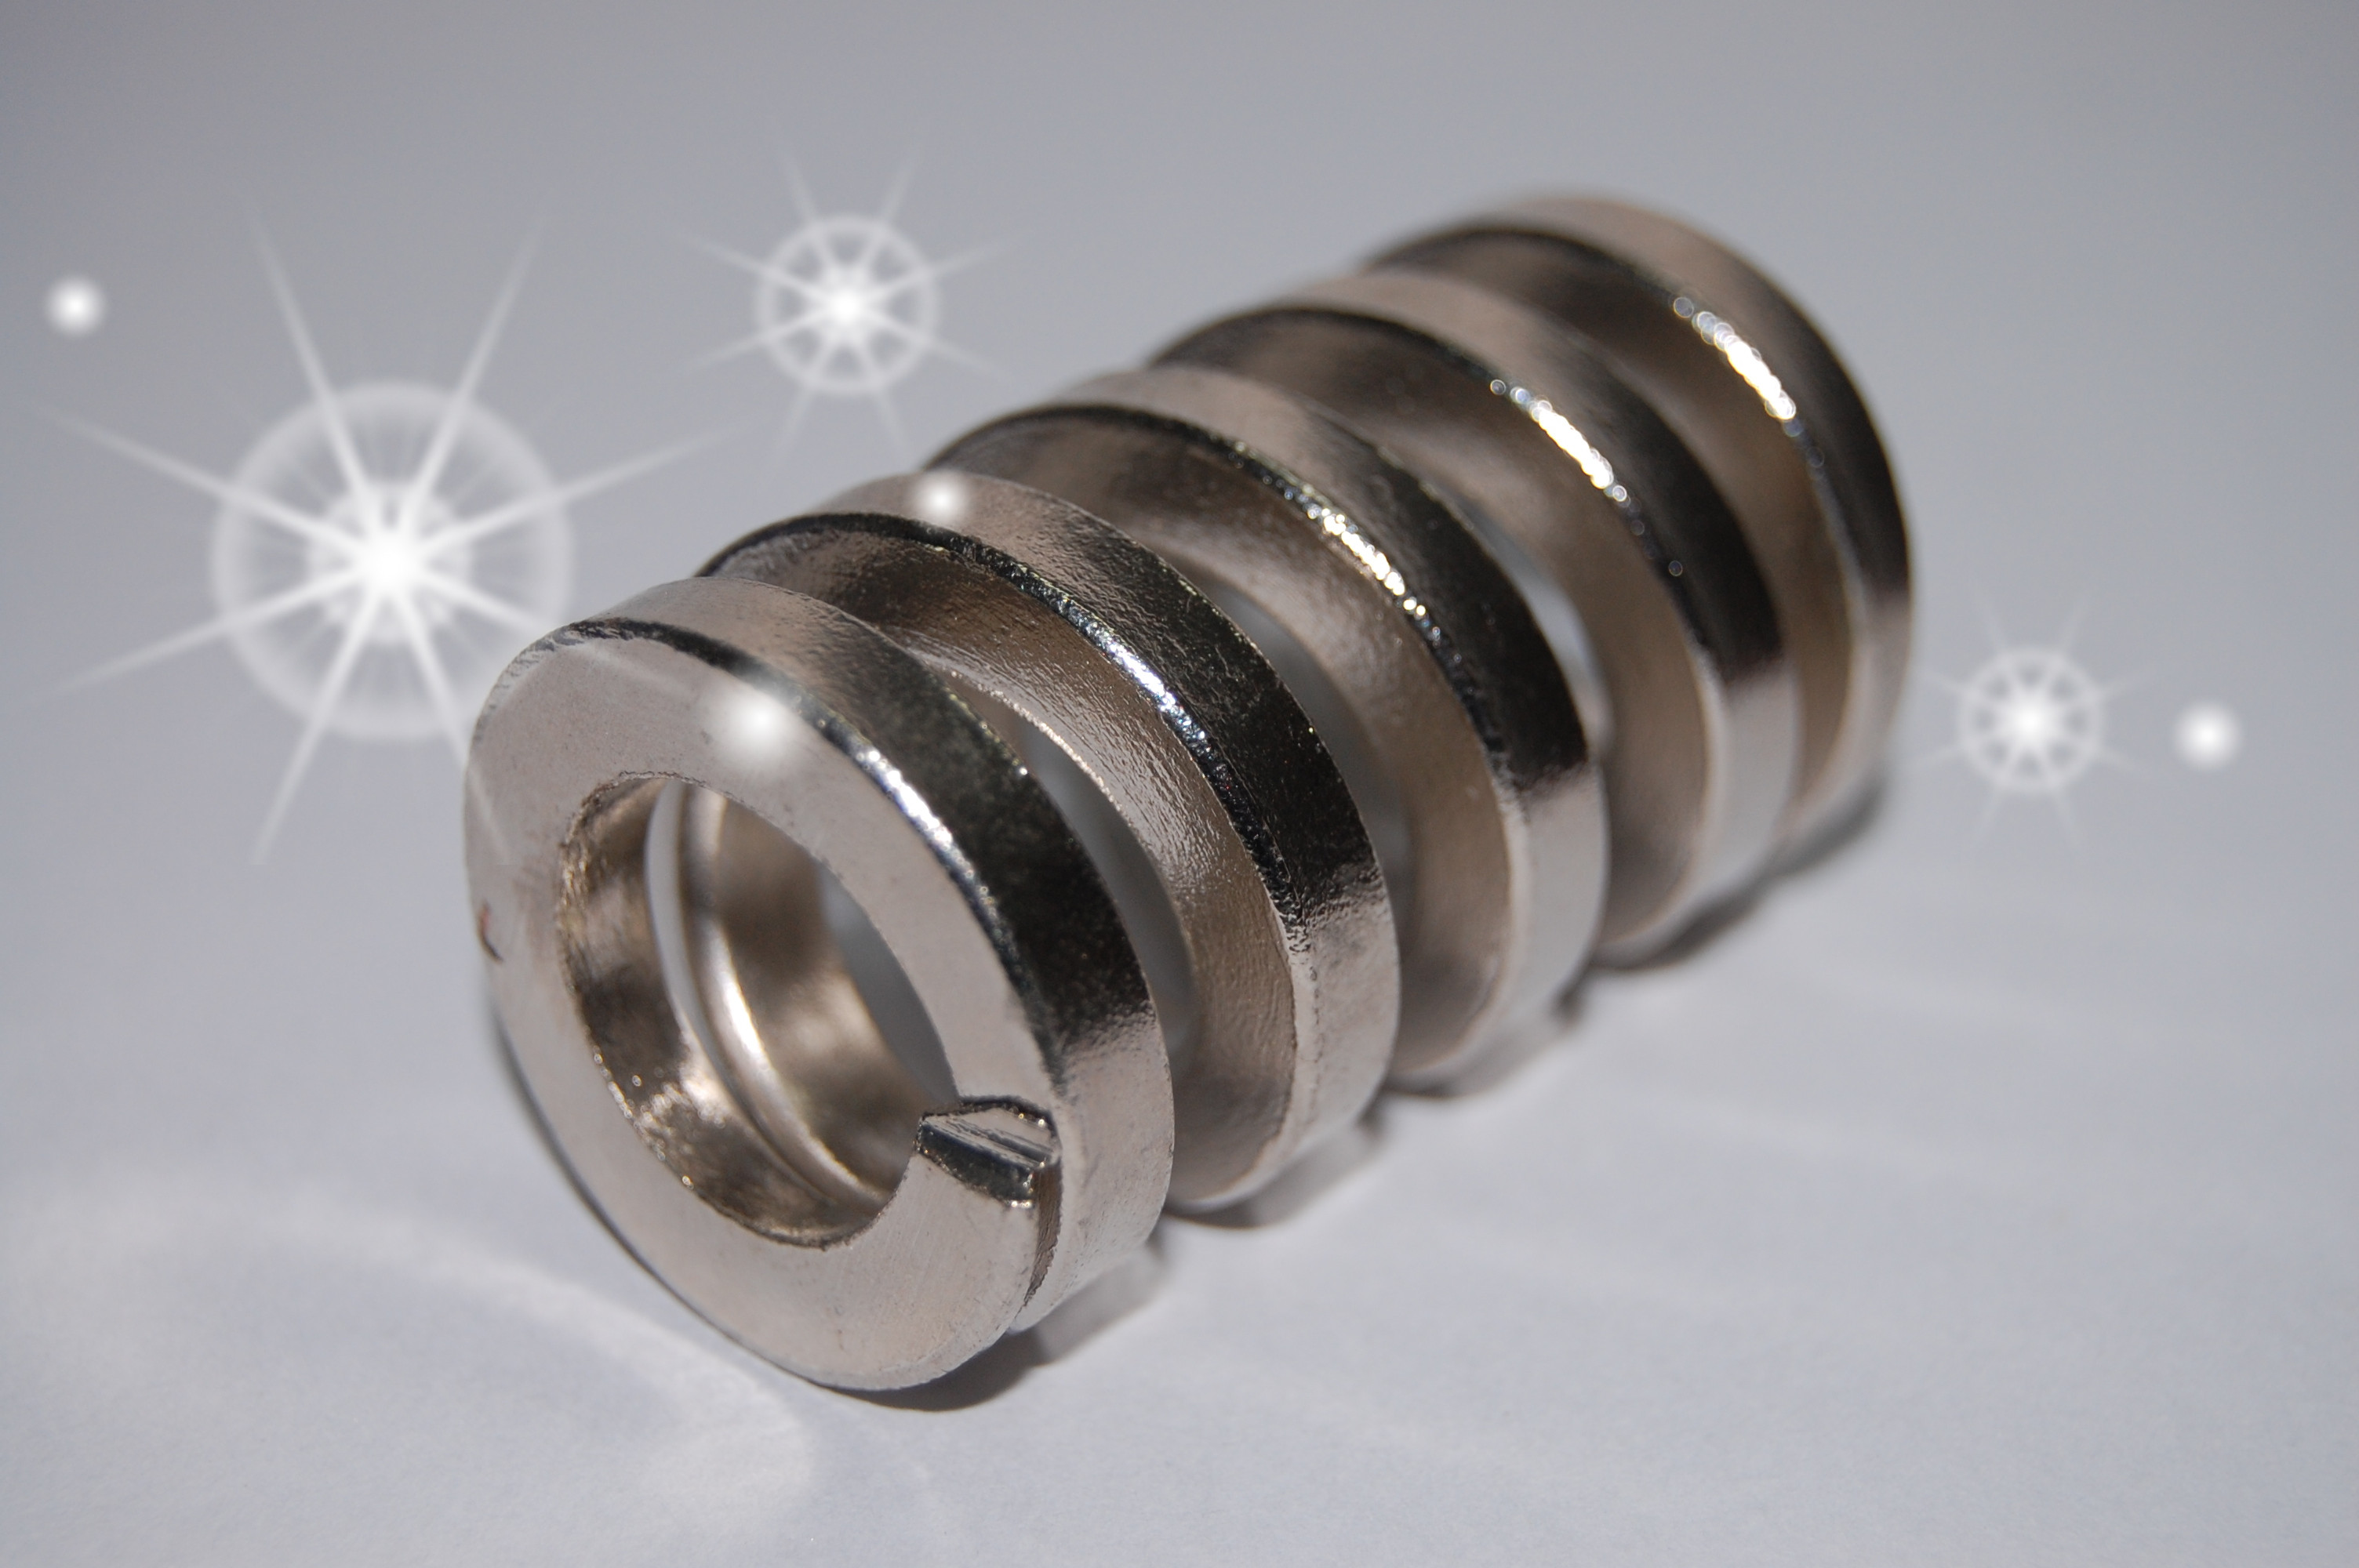 8 Things You Probably Didn't Know About Compression Springs